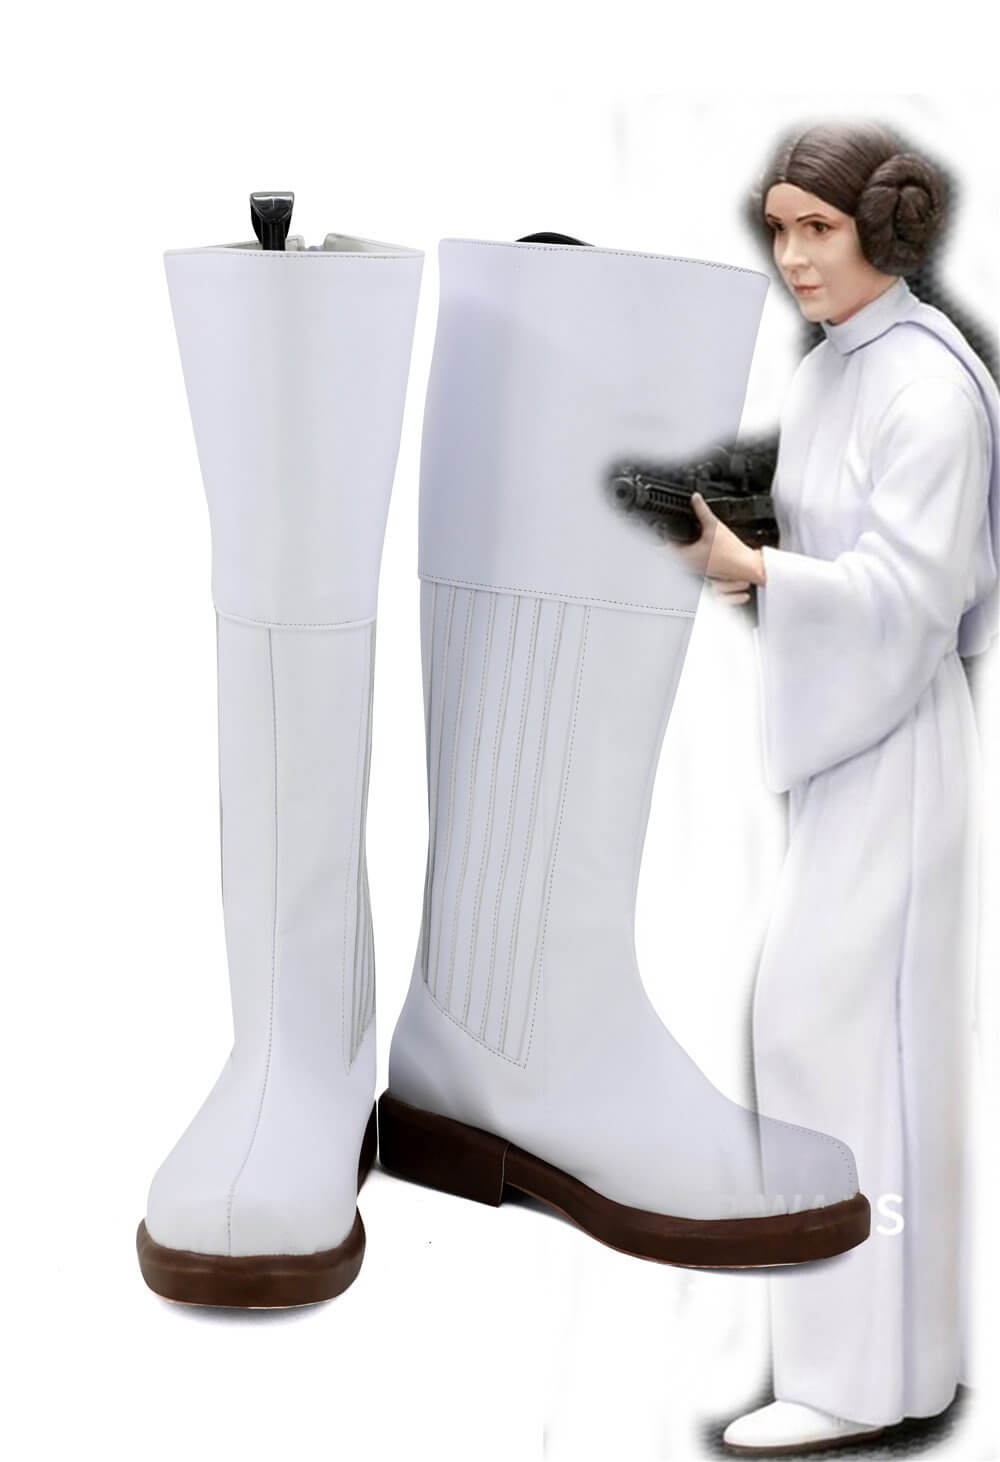 Star Wars Princesse Leia Bottes Blanches Cosplay Chaussures